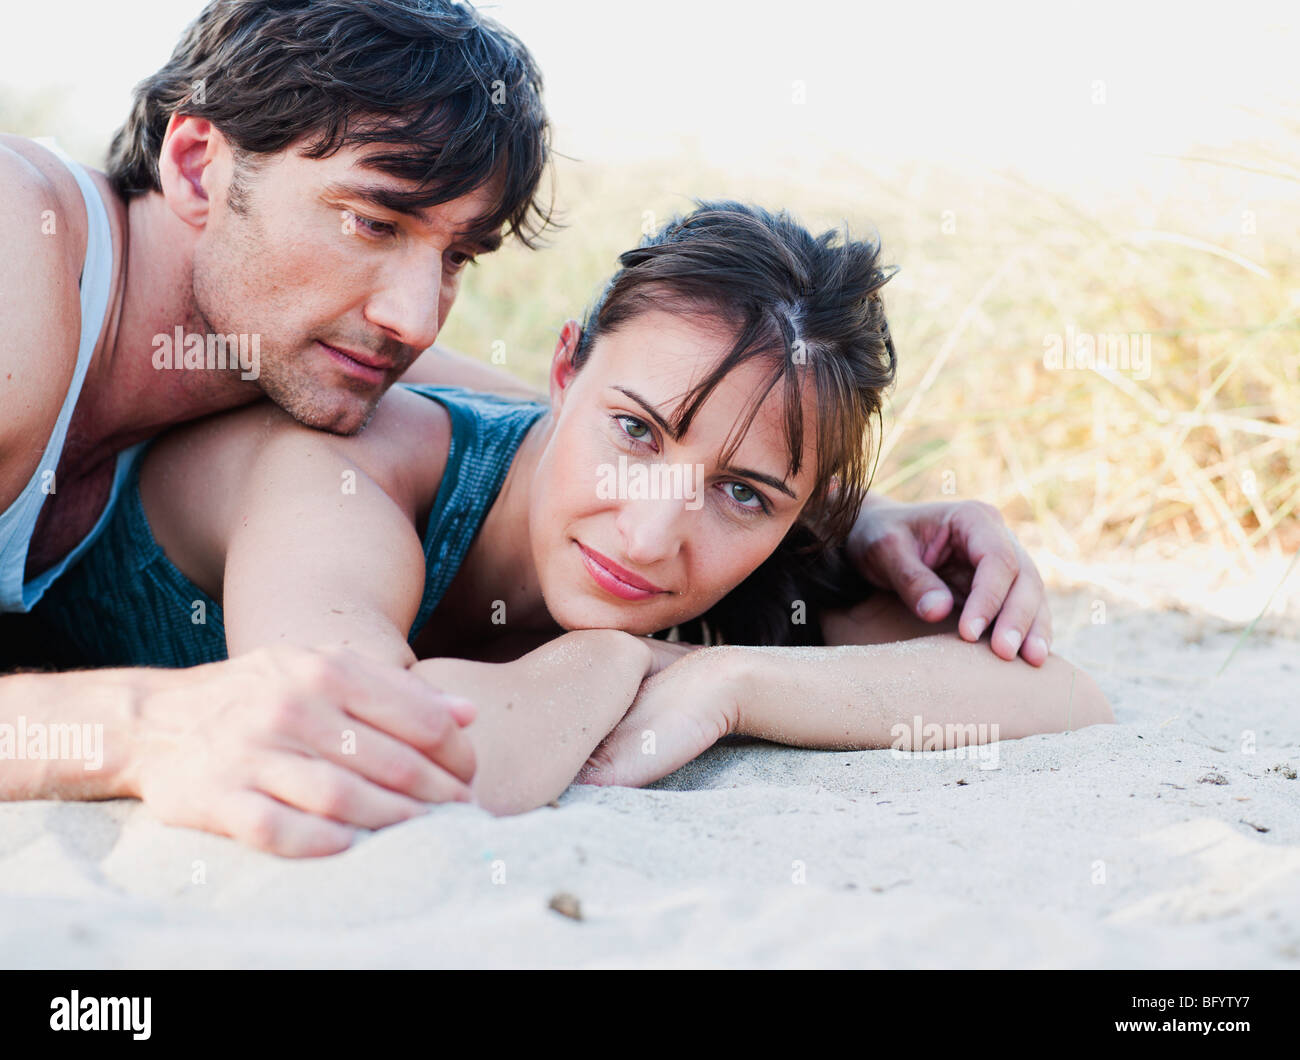 couple lying in sand smiling Stock Photo